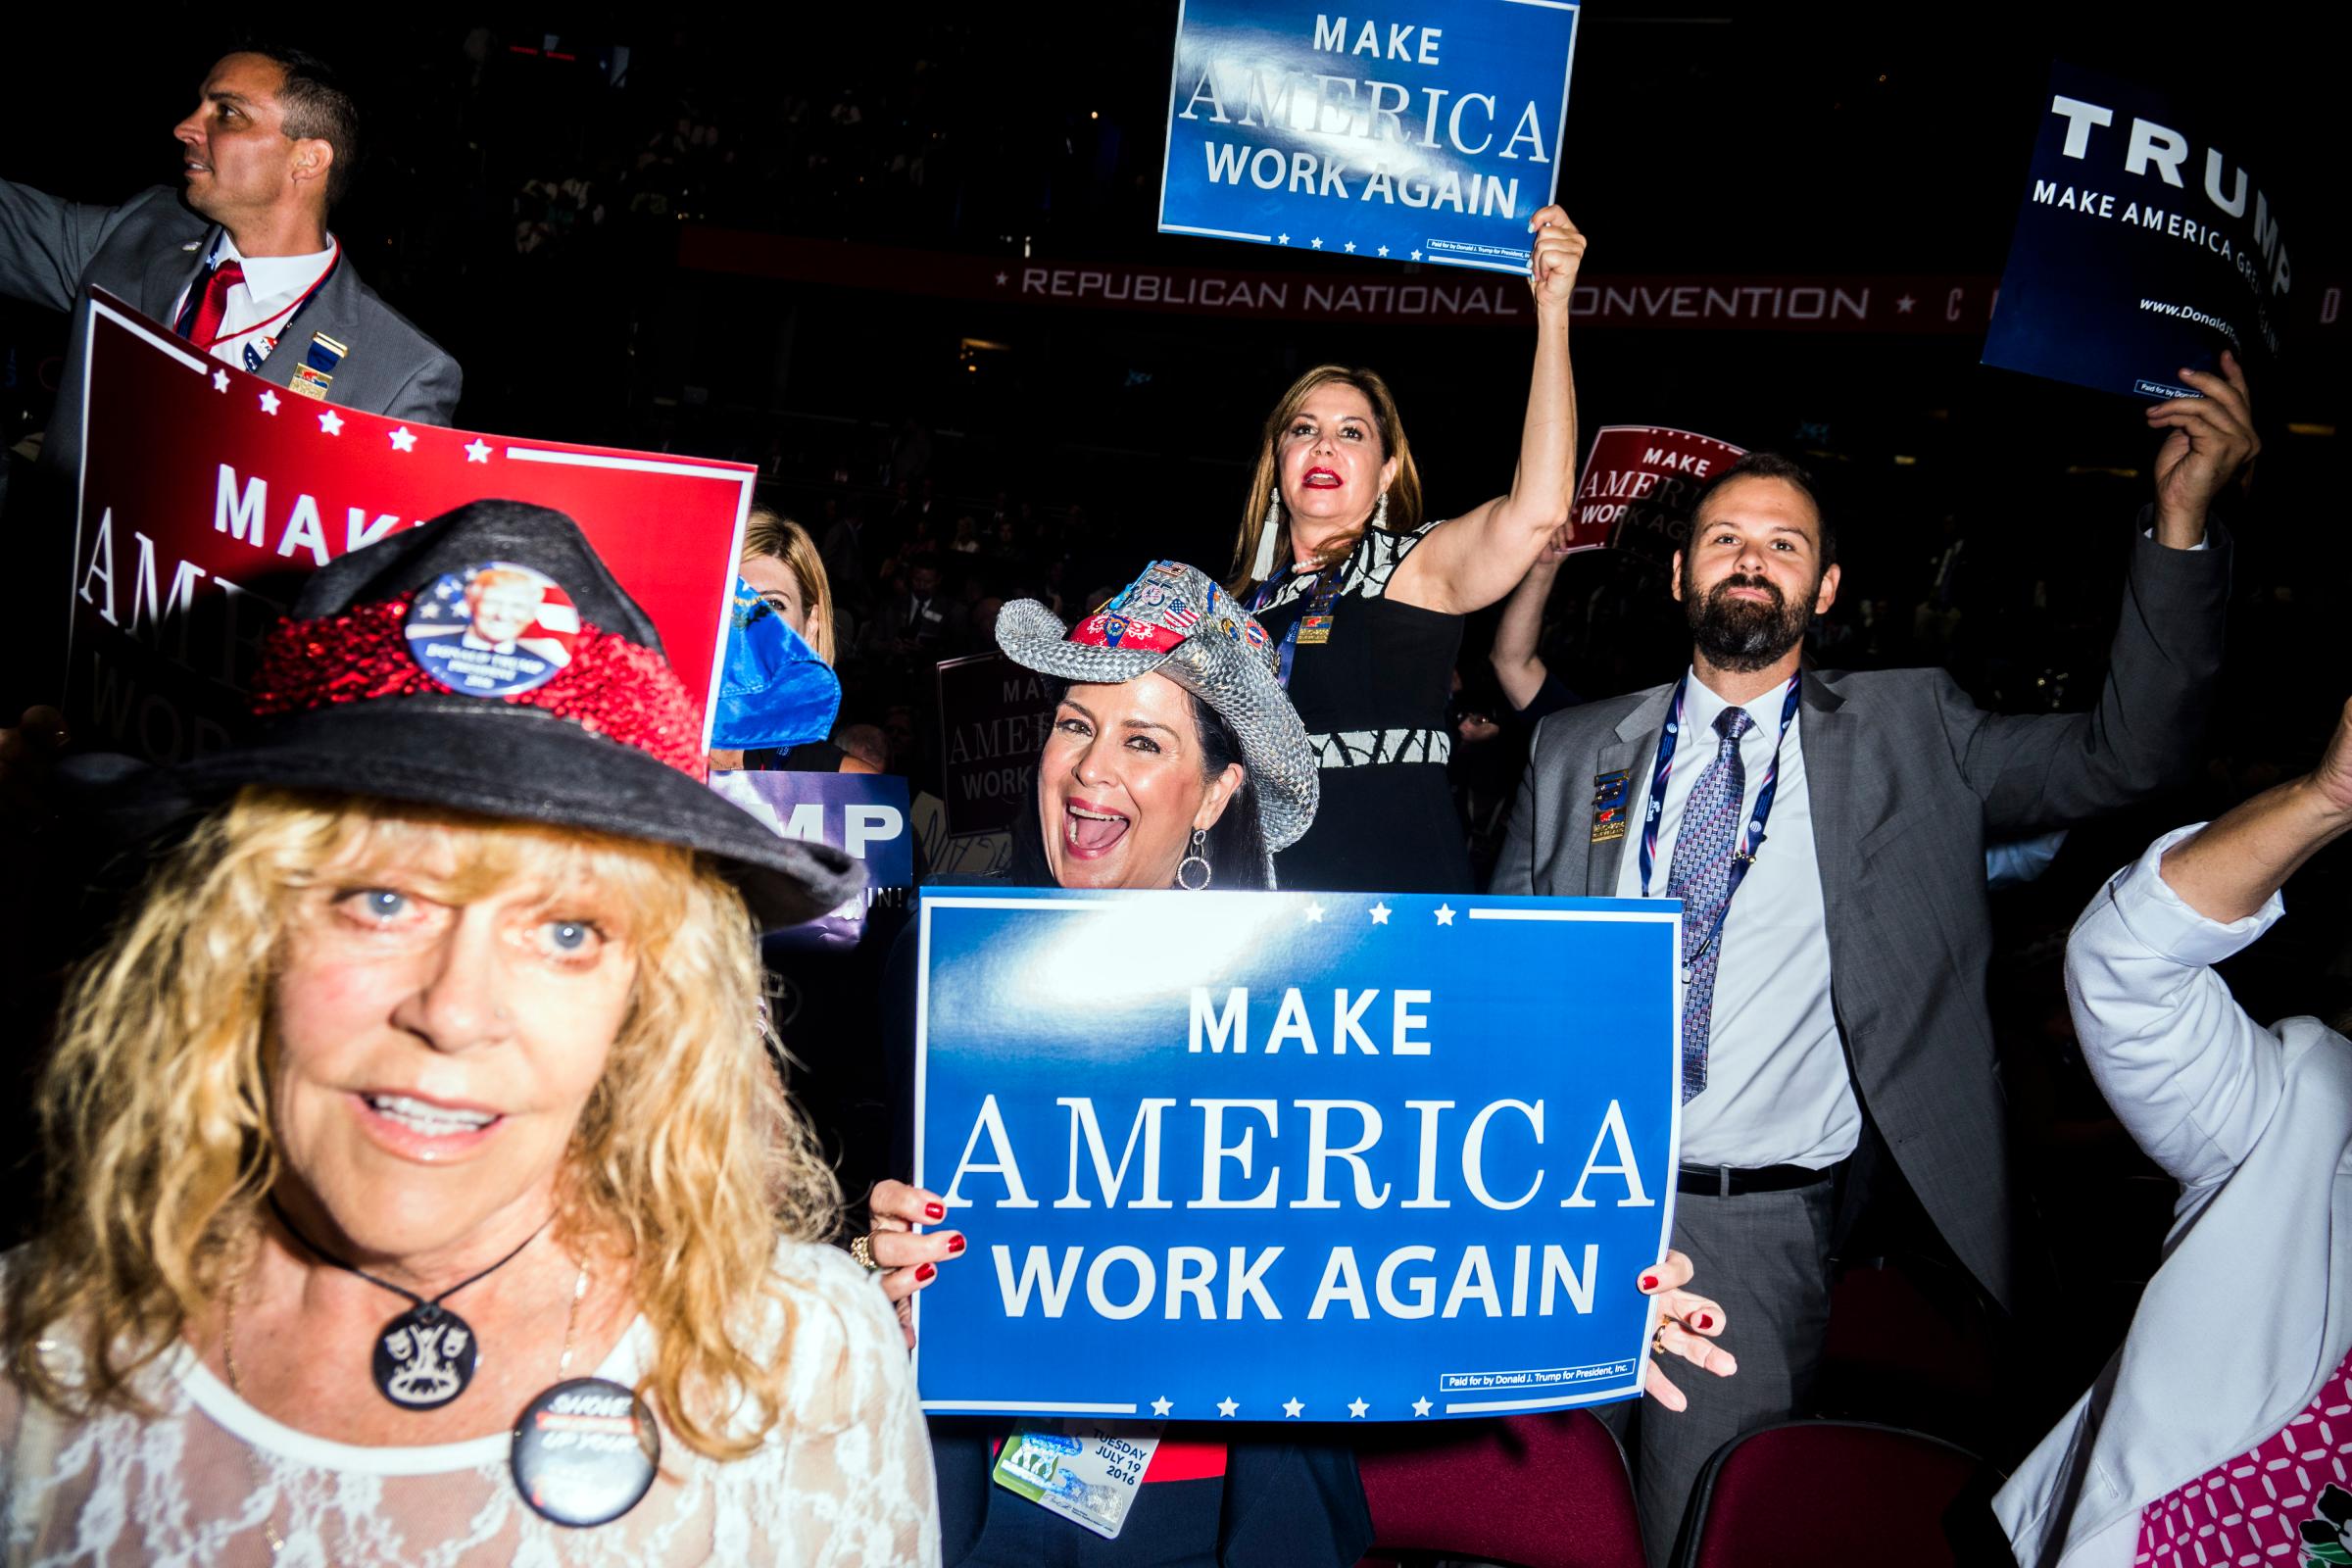 Attendees hold signs at the Republican National Convention in Cleveland.